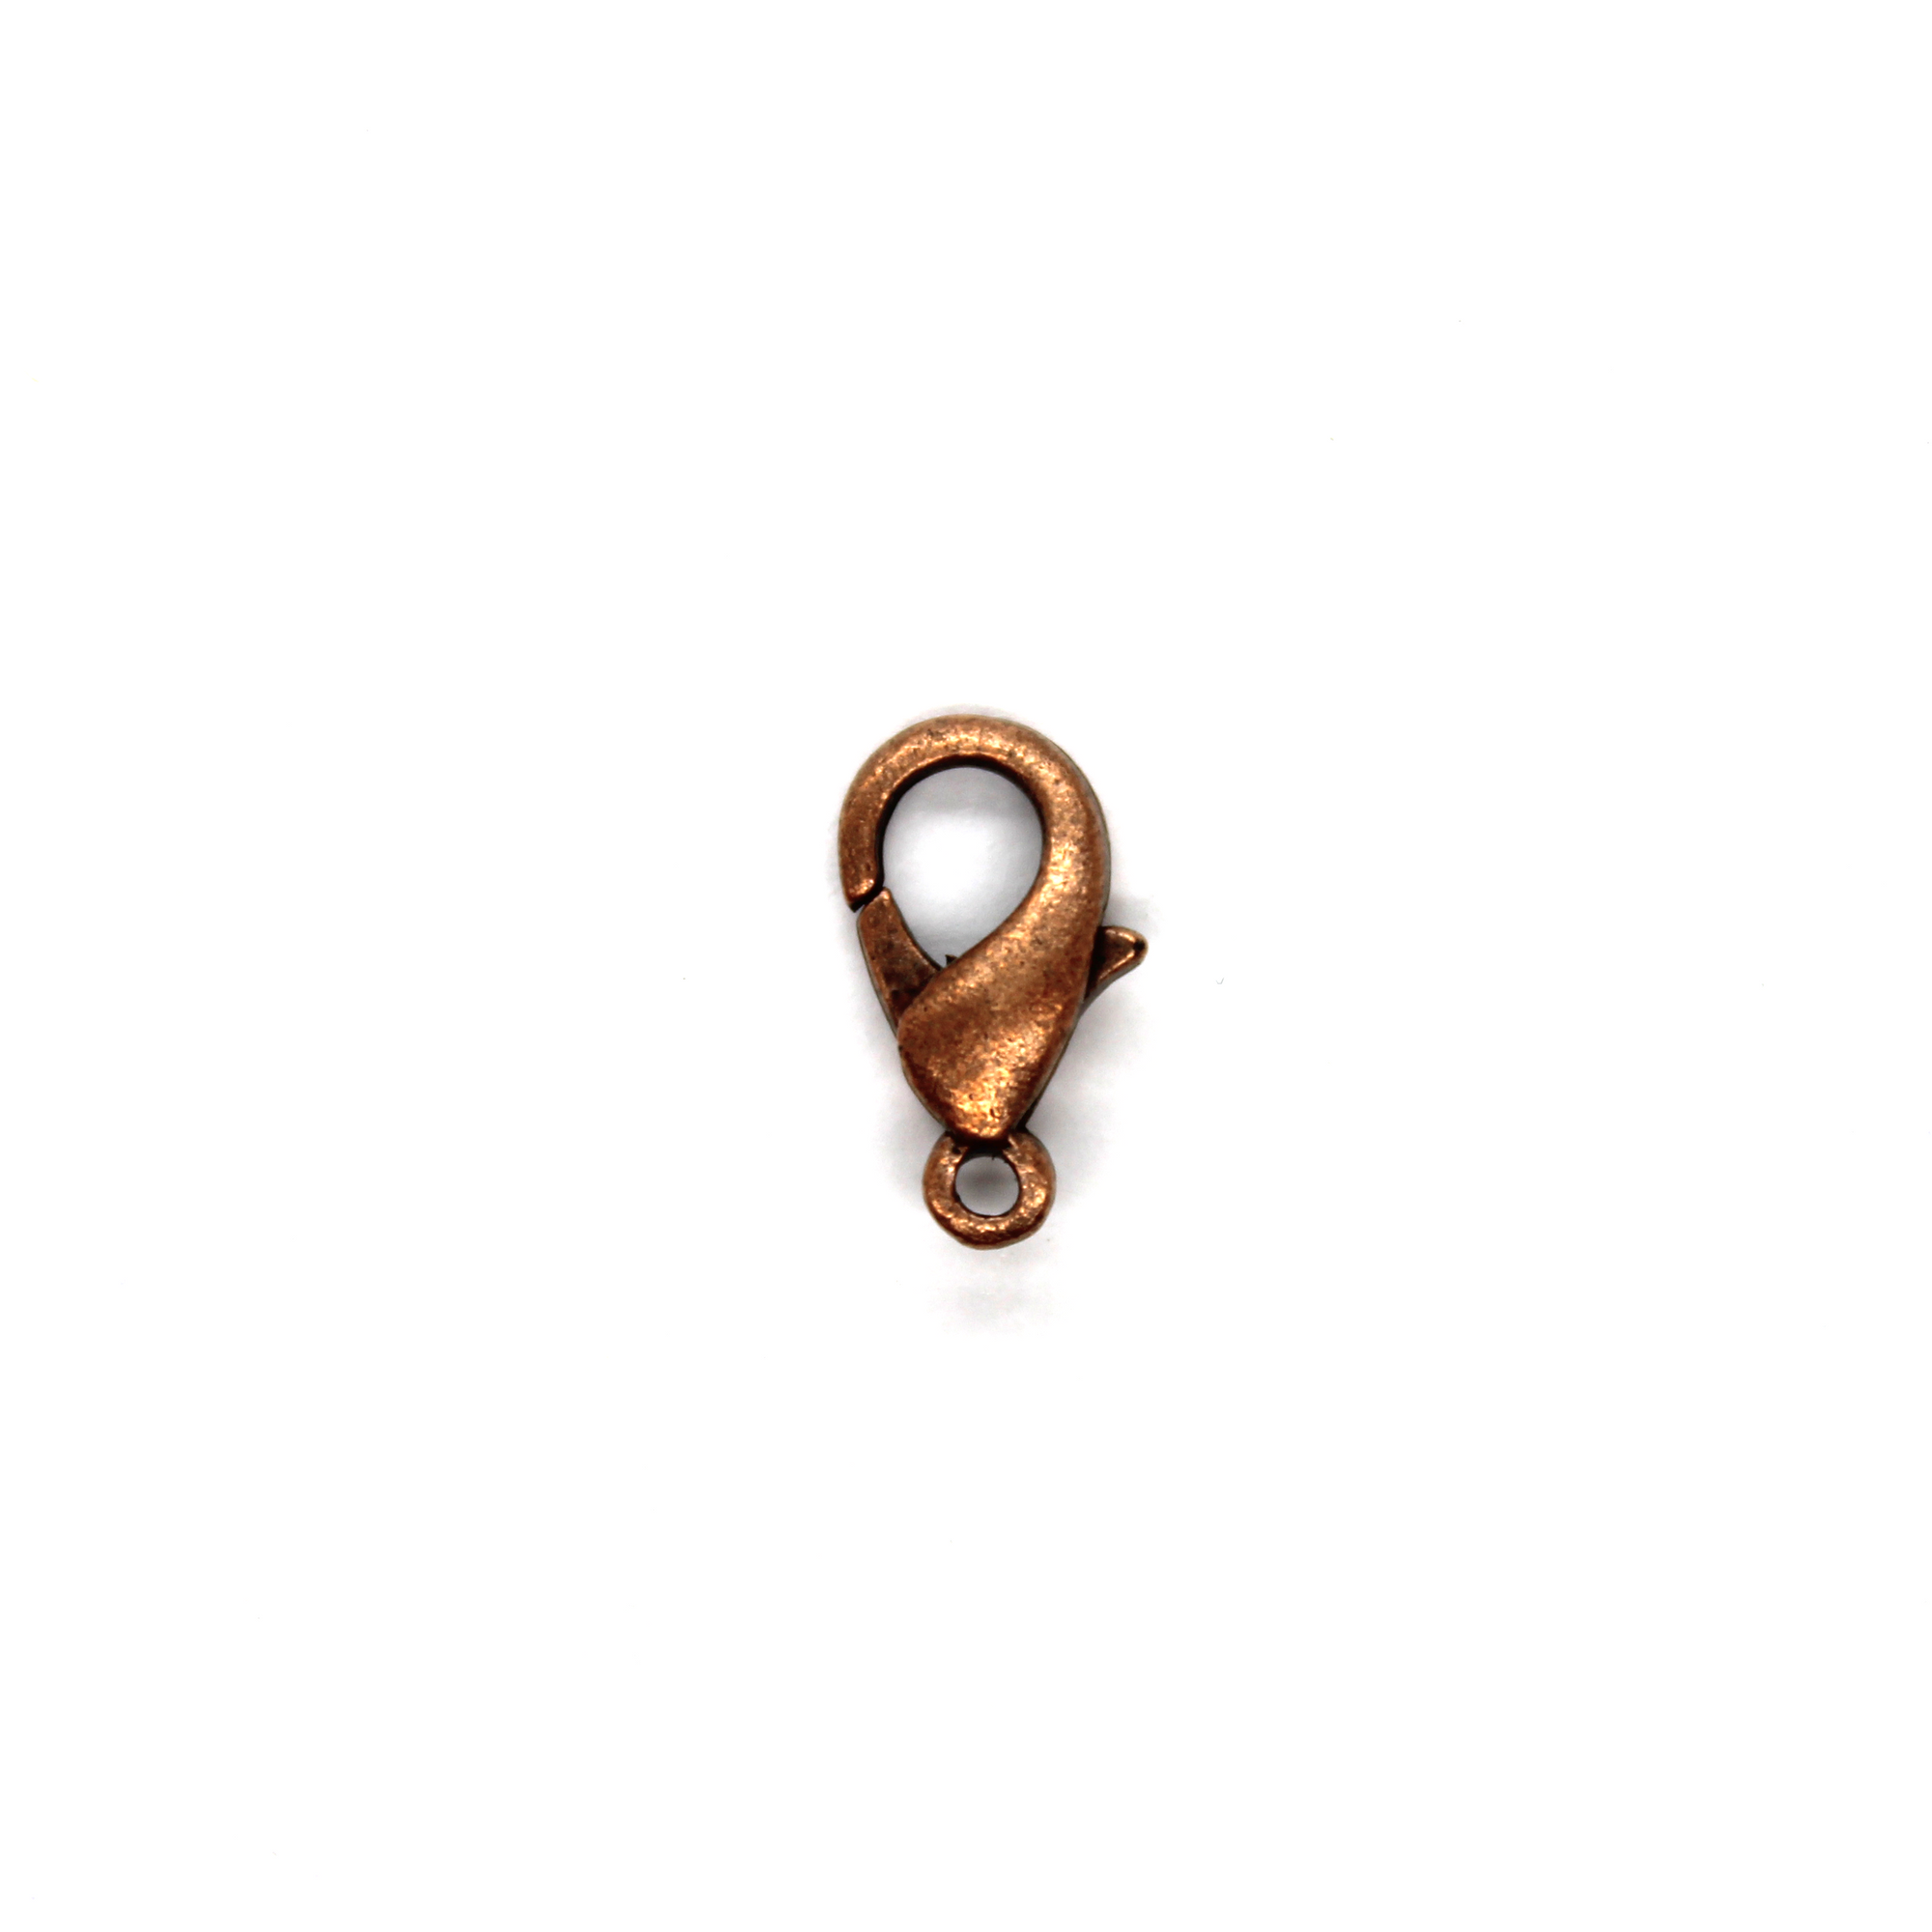 Clasp, Lobster Clasps, Copper Alloy, 10mm x 6mm, Sold Per pkg of 15